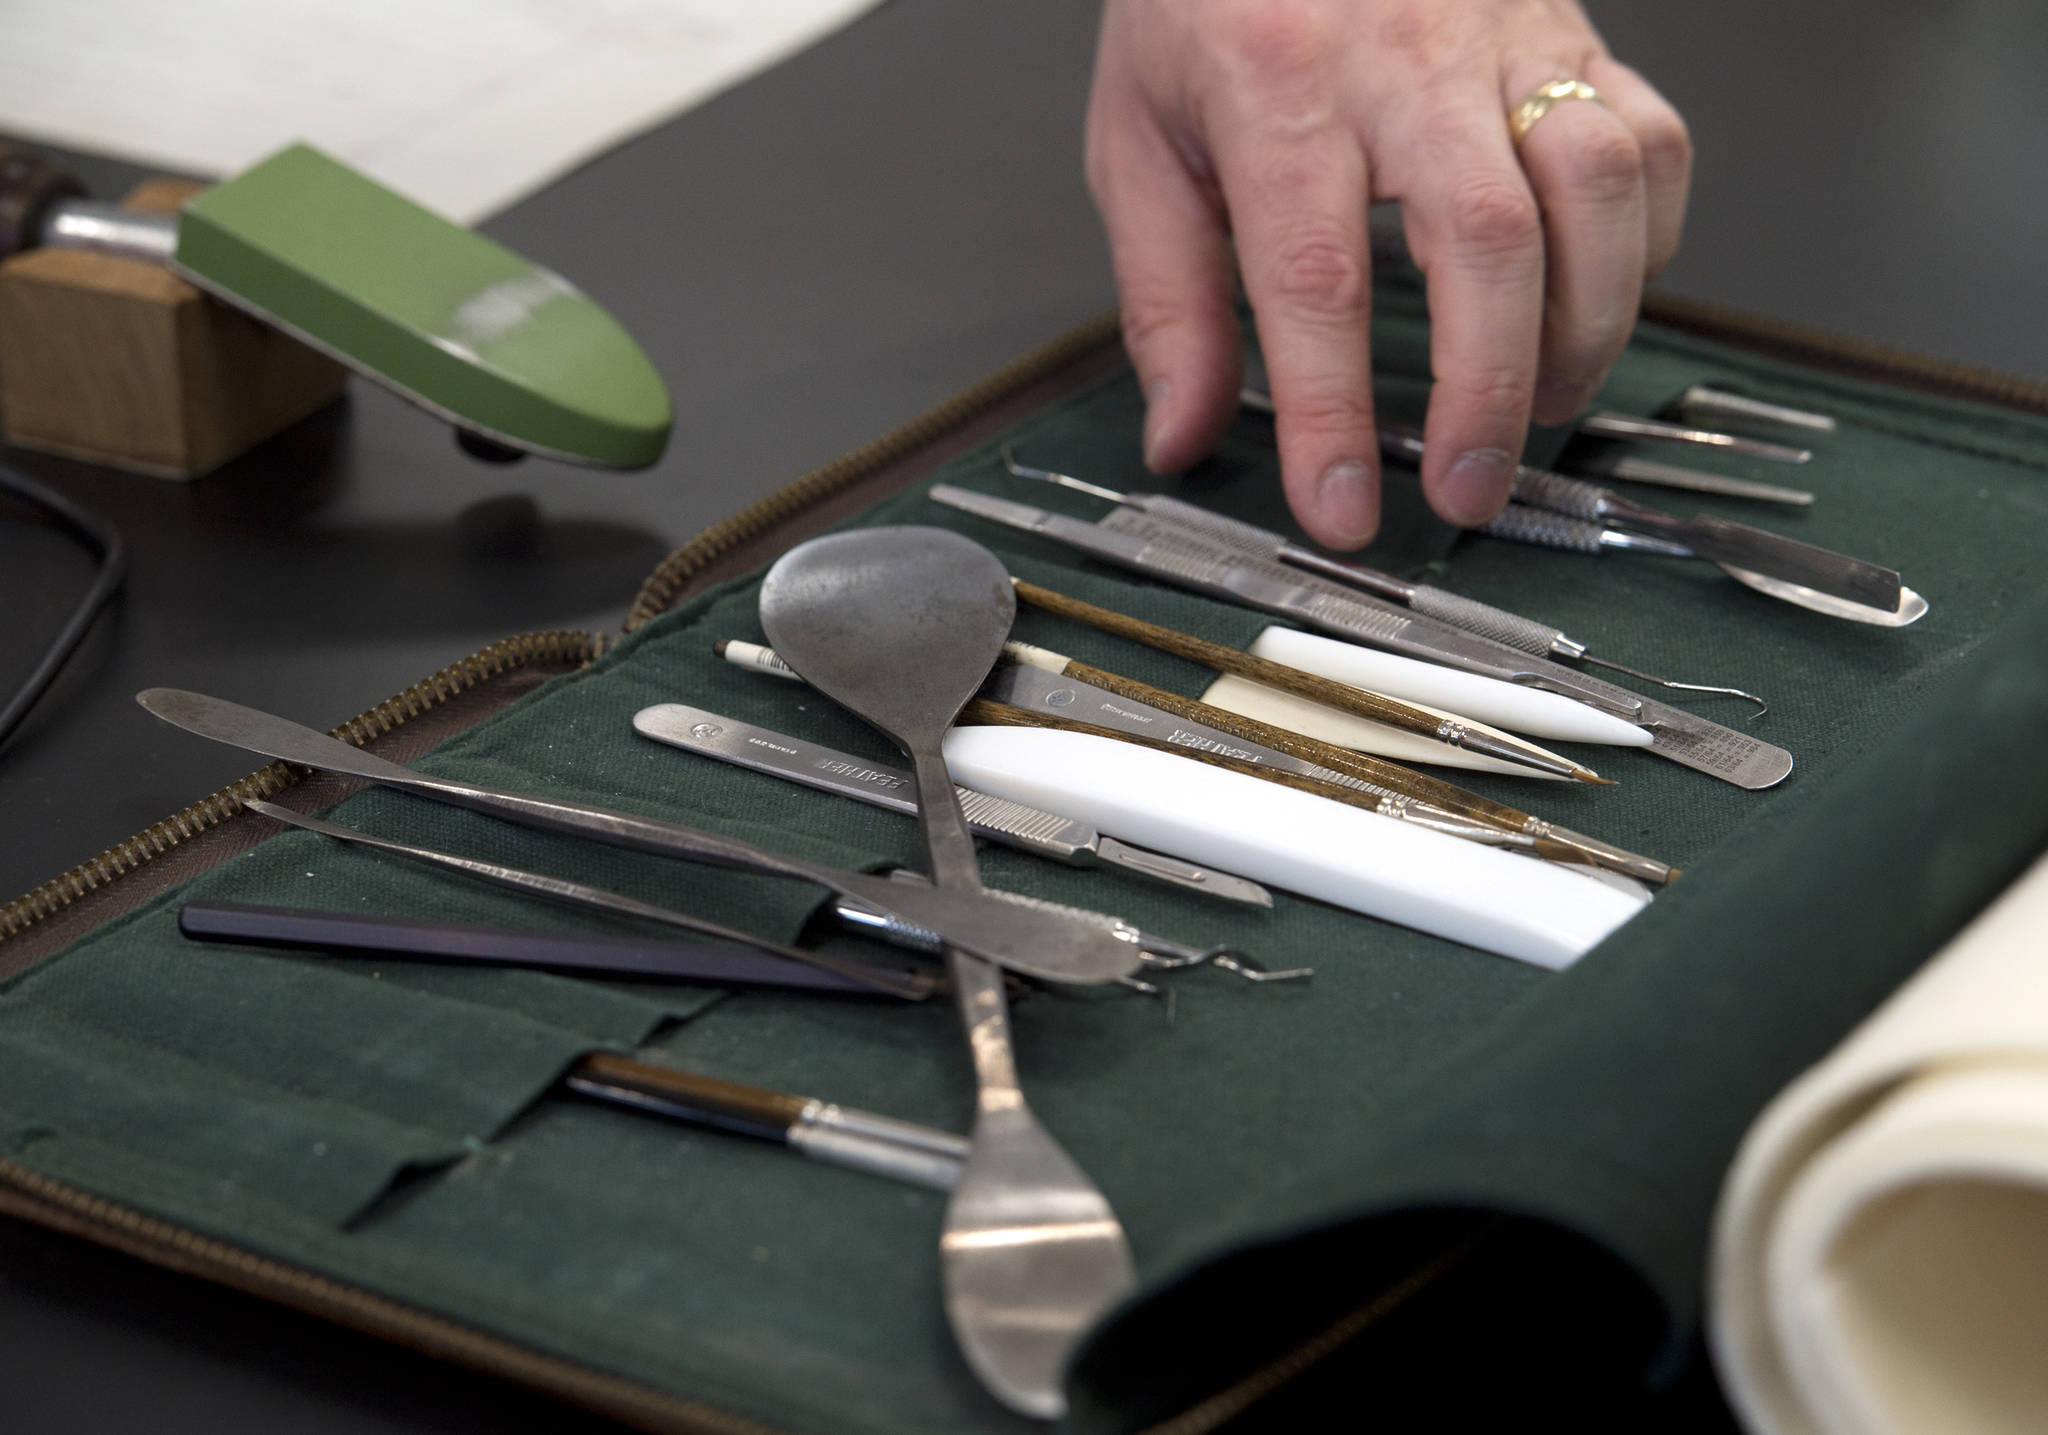 Seth Irwin, a paper conservator from Boston, picks through his tools while working at the Alaska State Museum on Sesquicentennial documents that will go on display later this year. (Michael Penn | Juneau Empire)